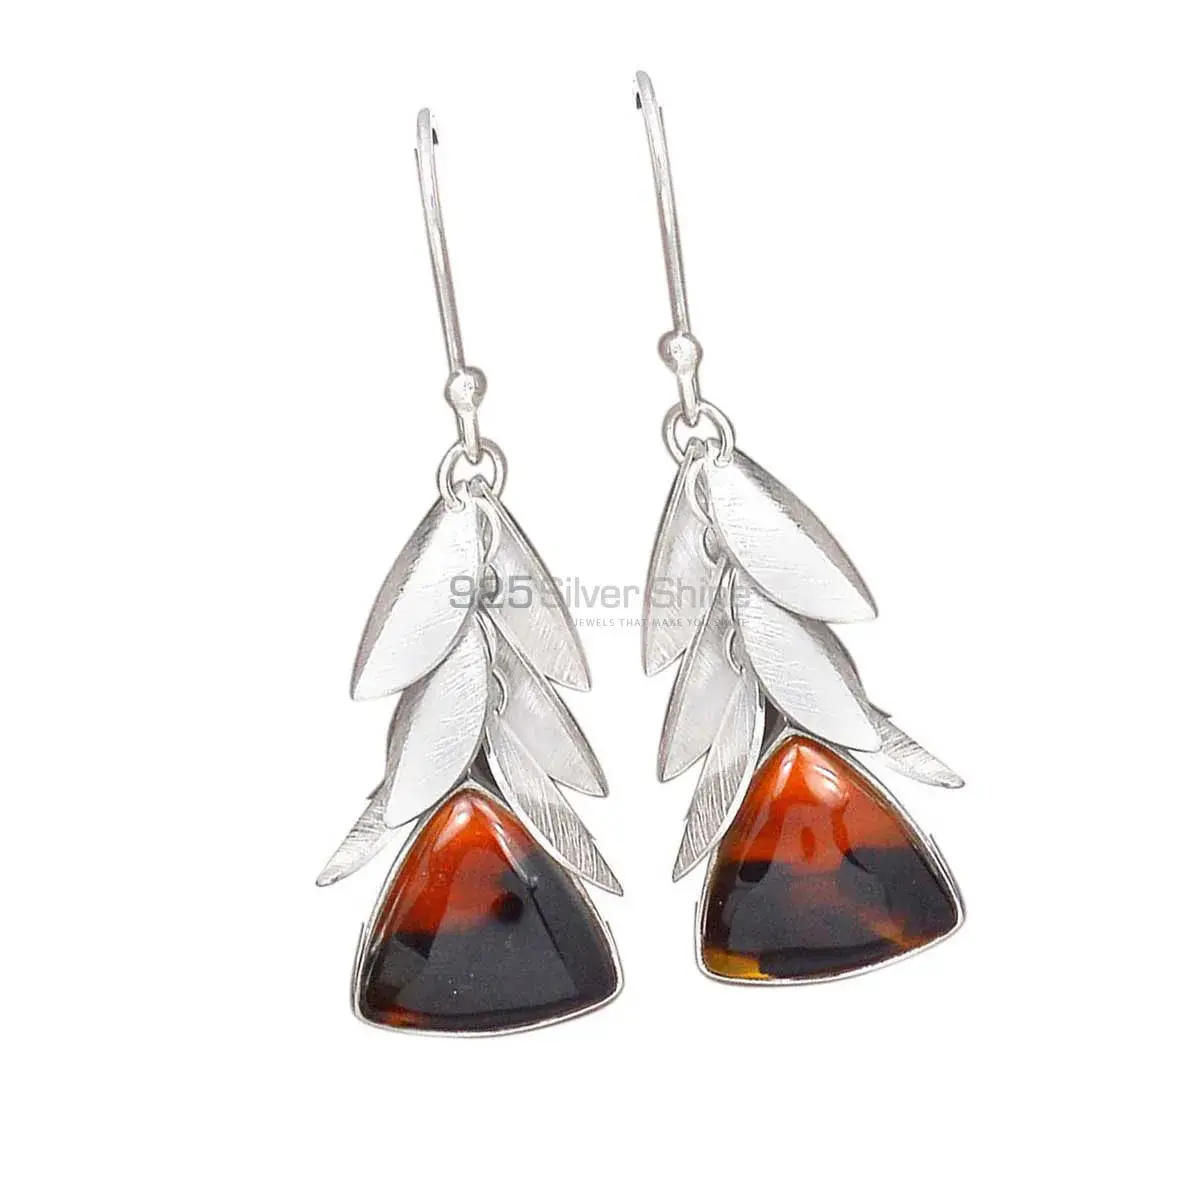 Affordable 925 Sterling Silver Handmade Earrings Suppliers In Sonora Sunset Gemstone Jewelry 925SE3036